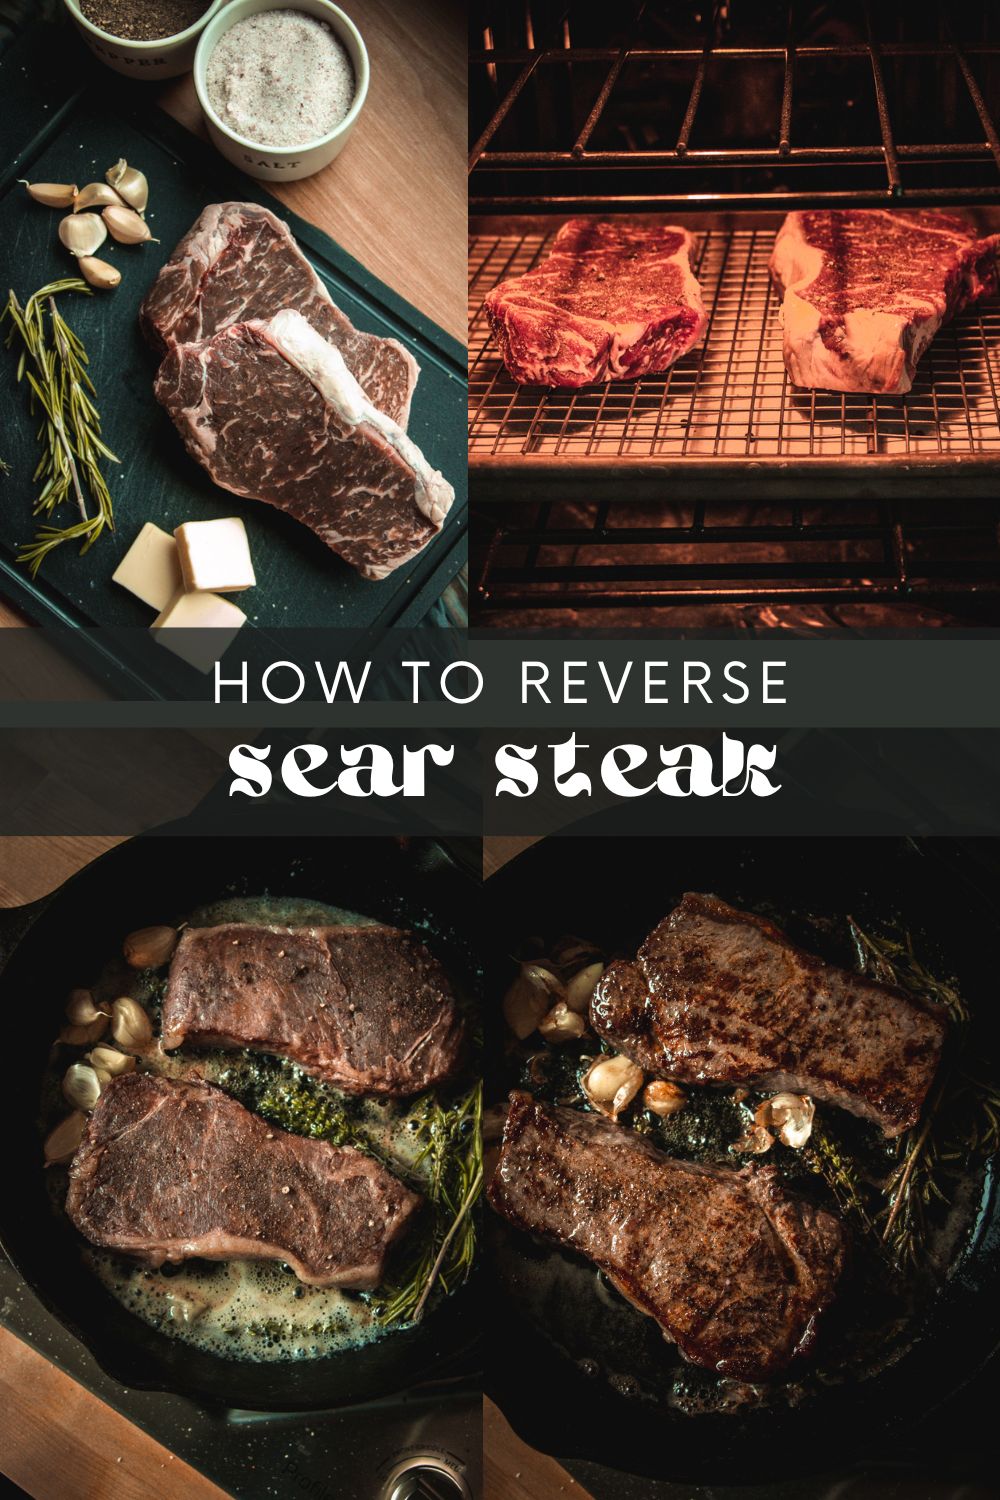 If you love nice, tender steak, then you must learn how to reverse sear a steak! Reverse searing is an easy method of cooking steak that gives you restaurant-quality results. With this method, you cook your reverse sear steak in oven before finishing it off at a high temperature - which results in a gorgeous browned crust and a juicy steak!